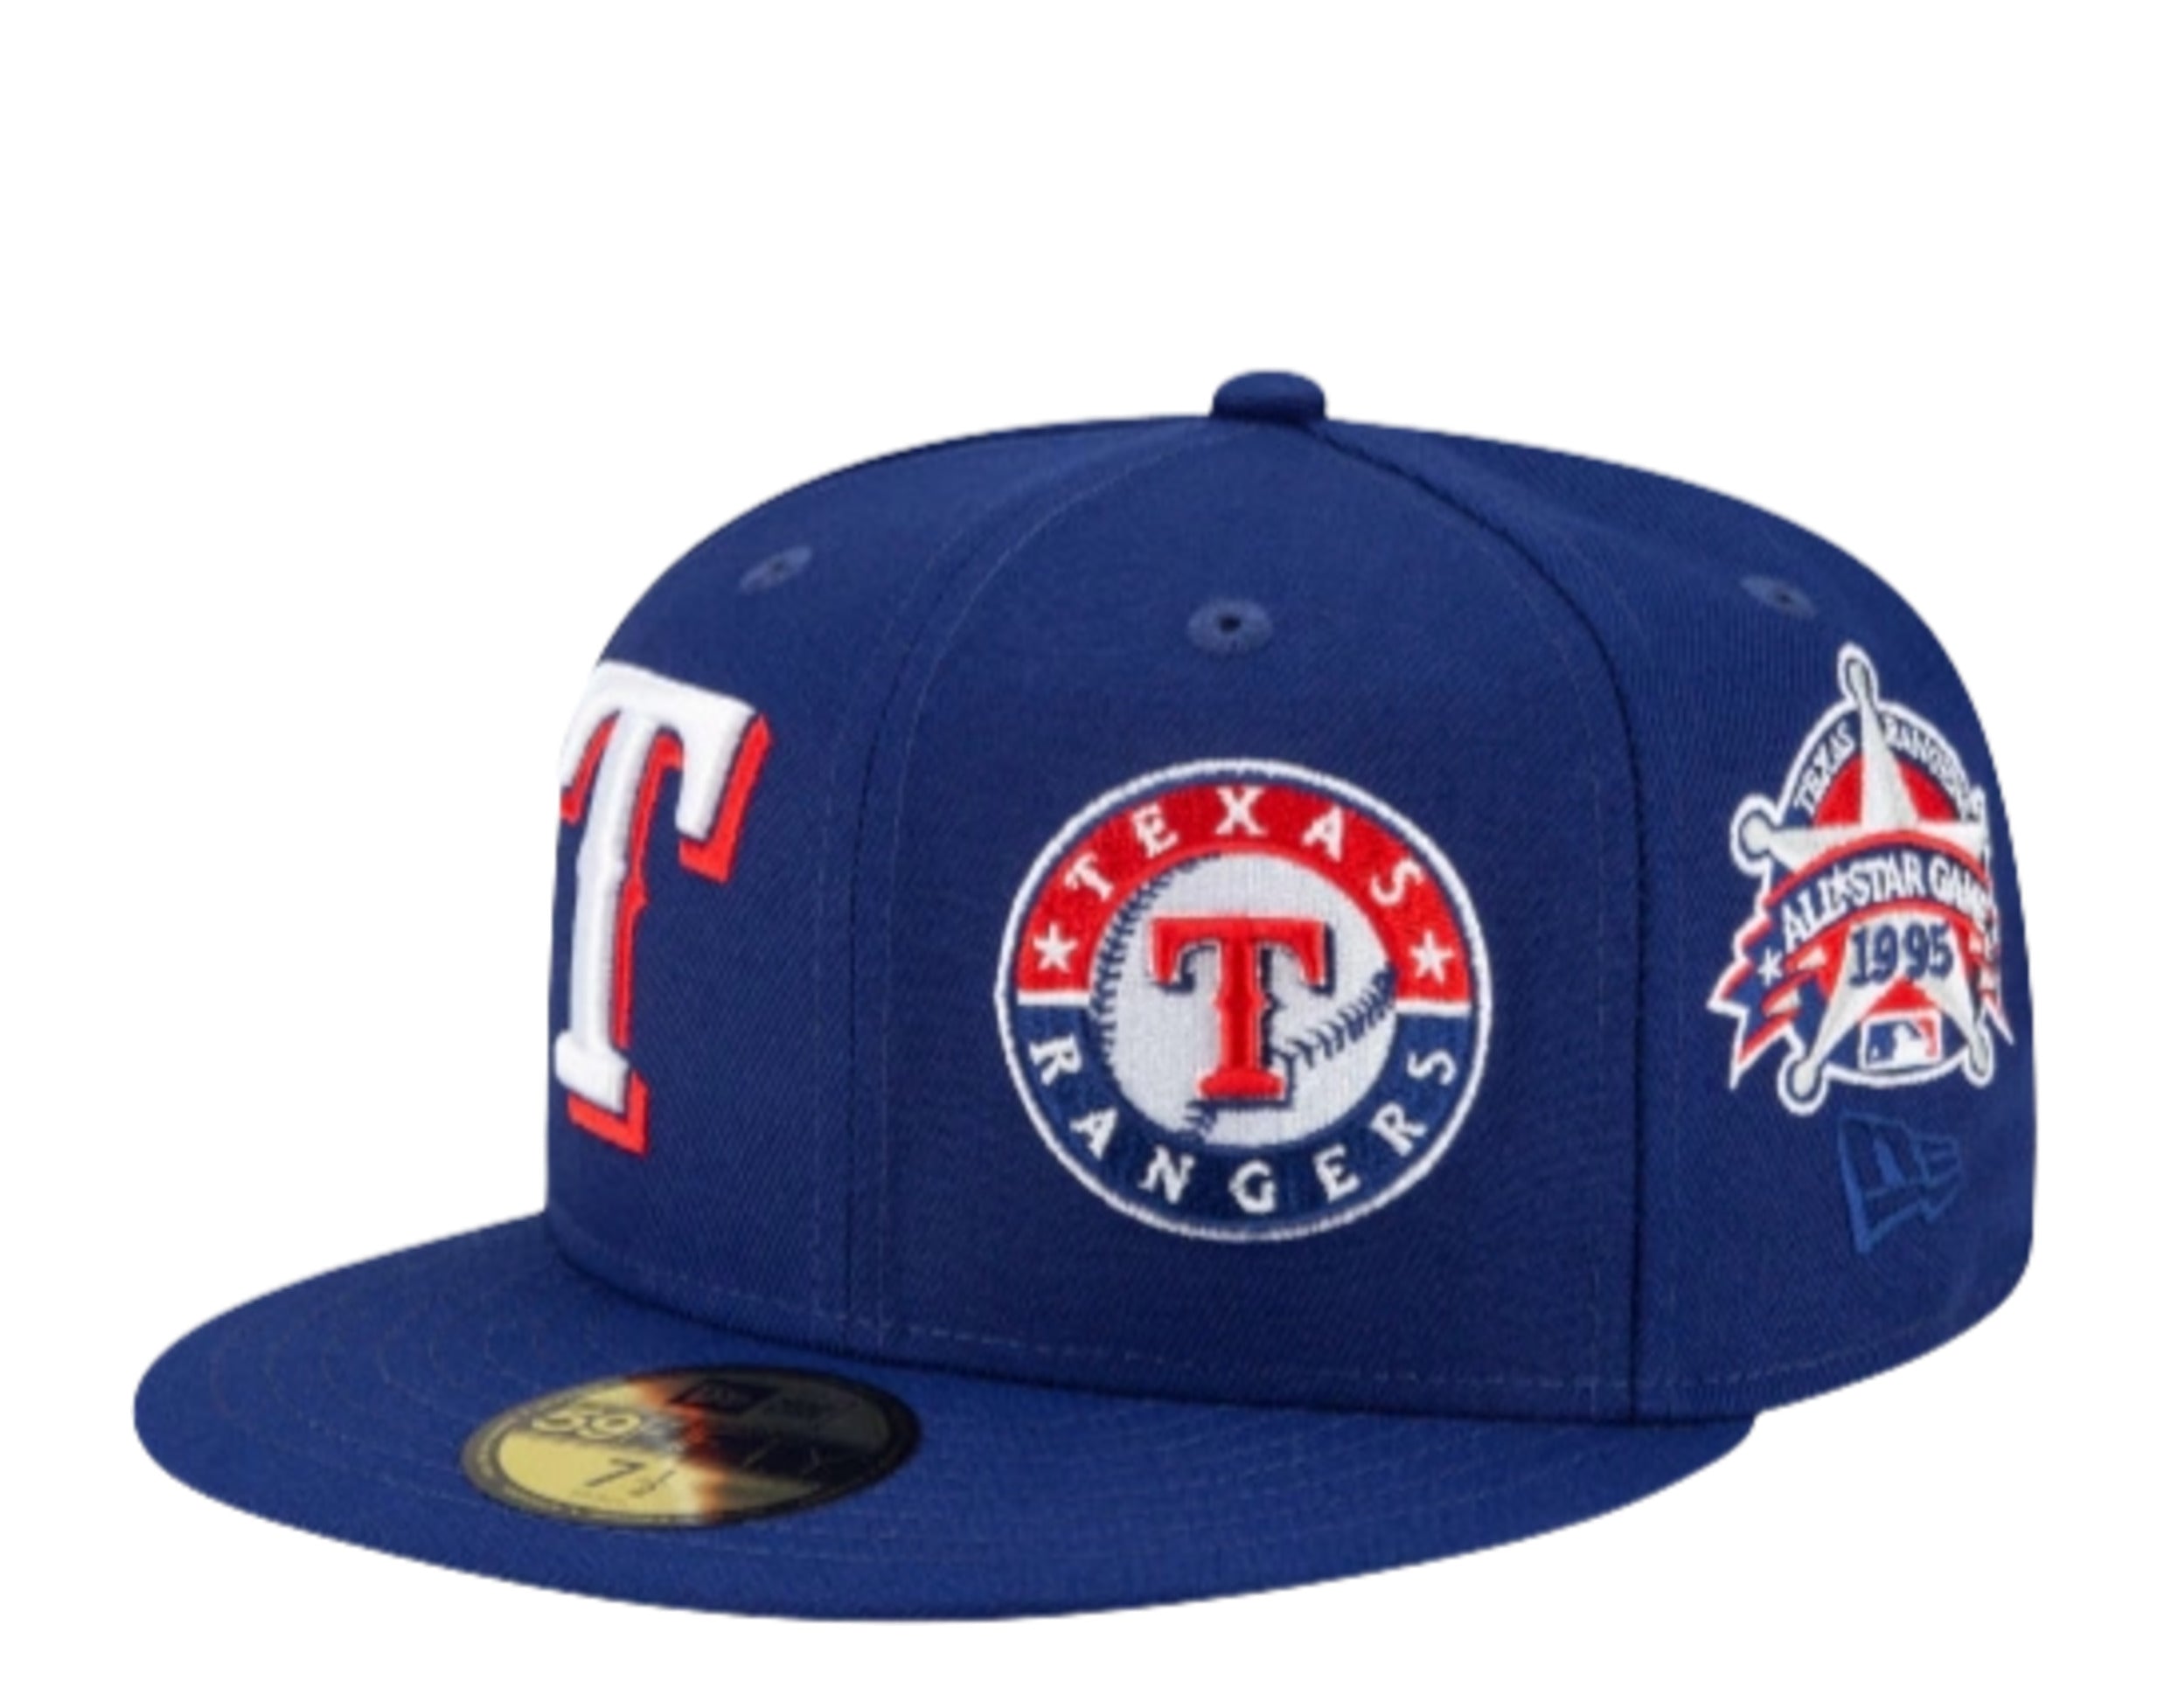 Texas Rangers World Series MLB Baseball Fully Embroidered Iron On Patch  3.0"